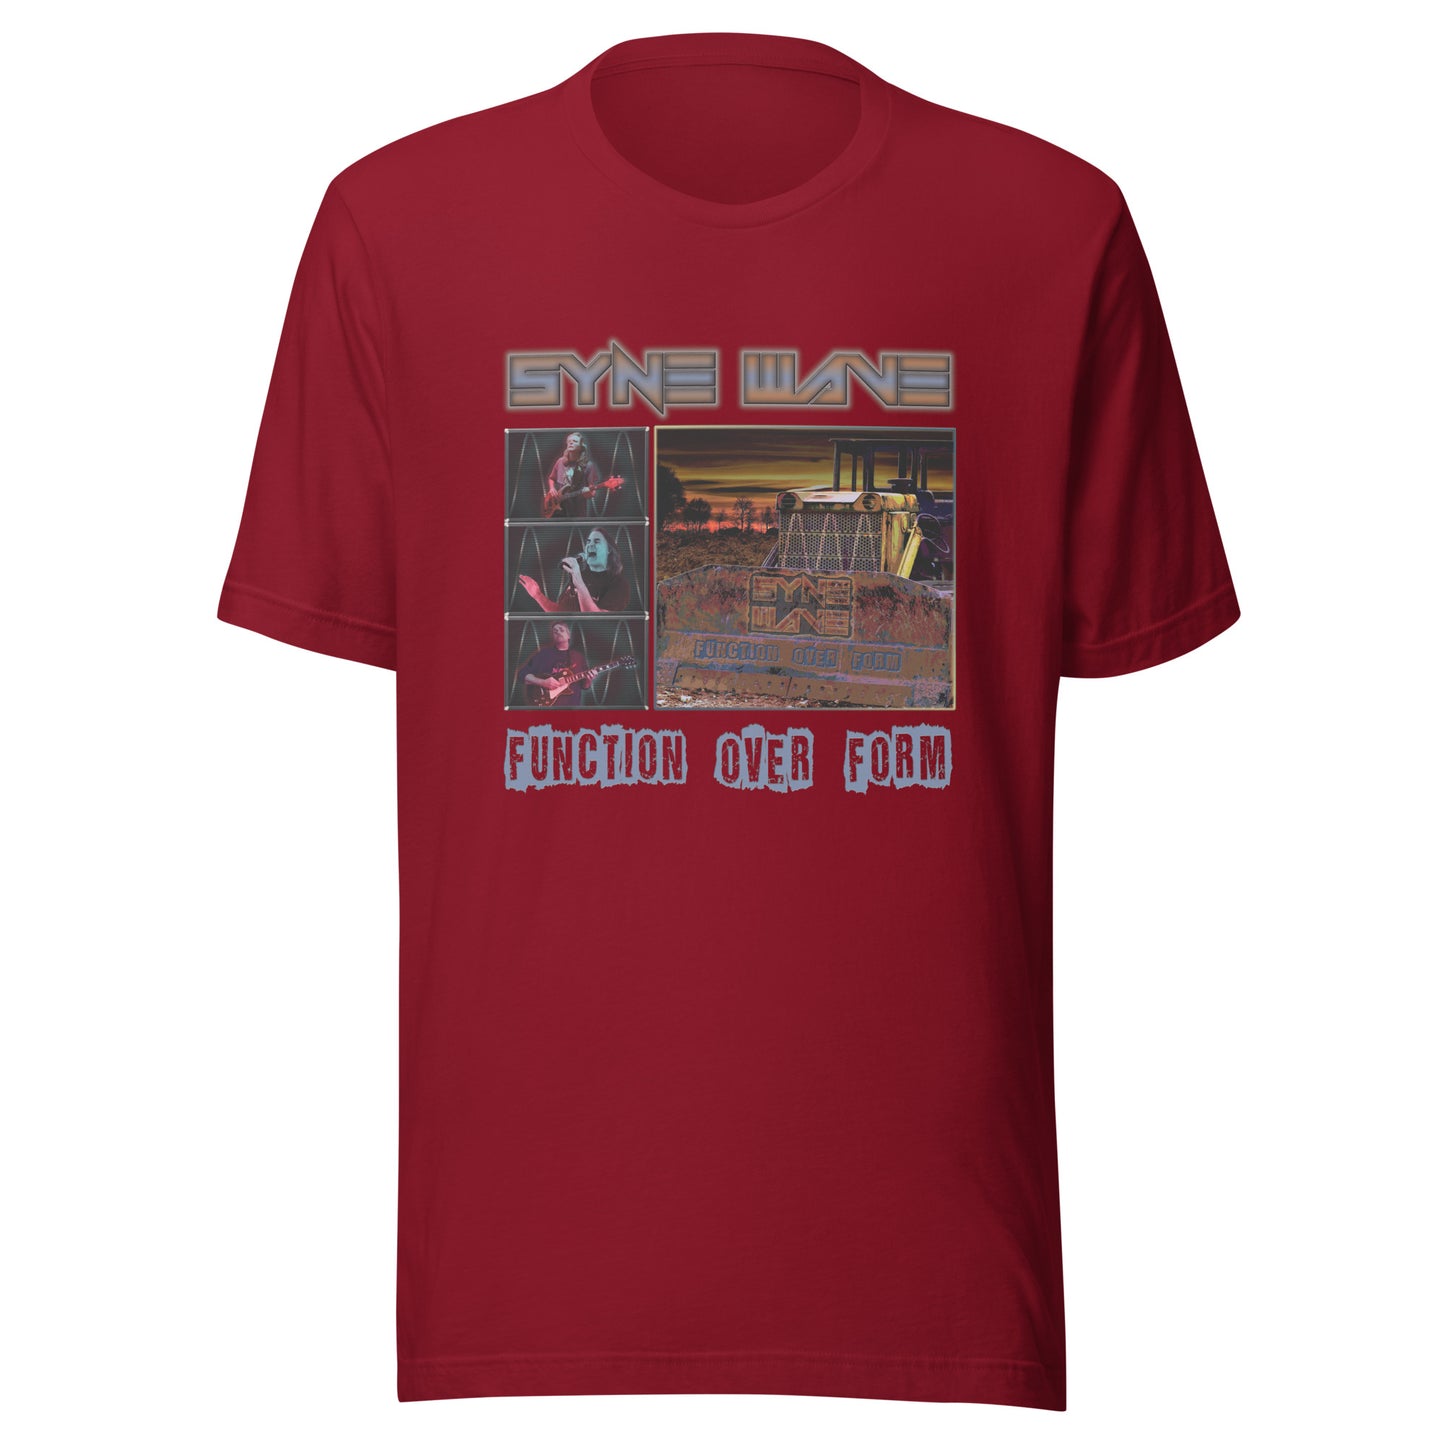 Syne Wave - Function Over Form T-Shirt